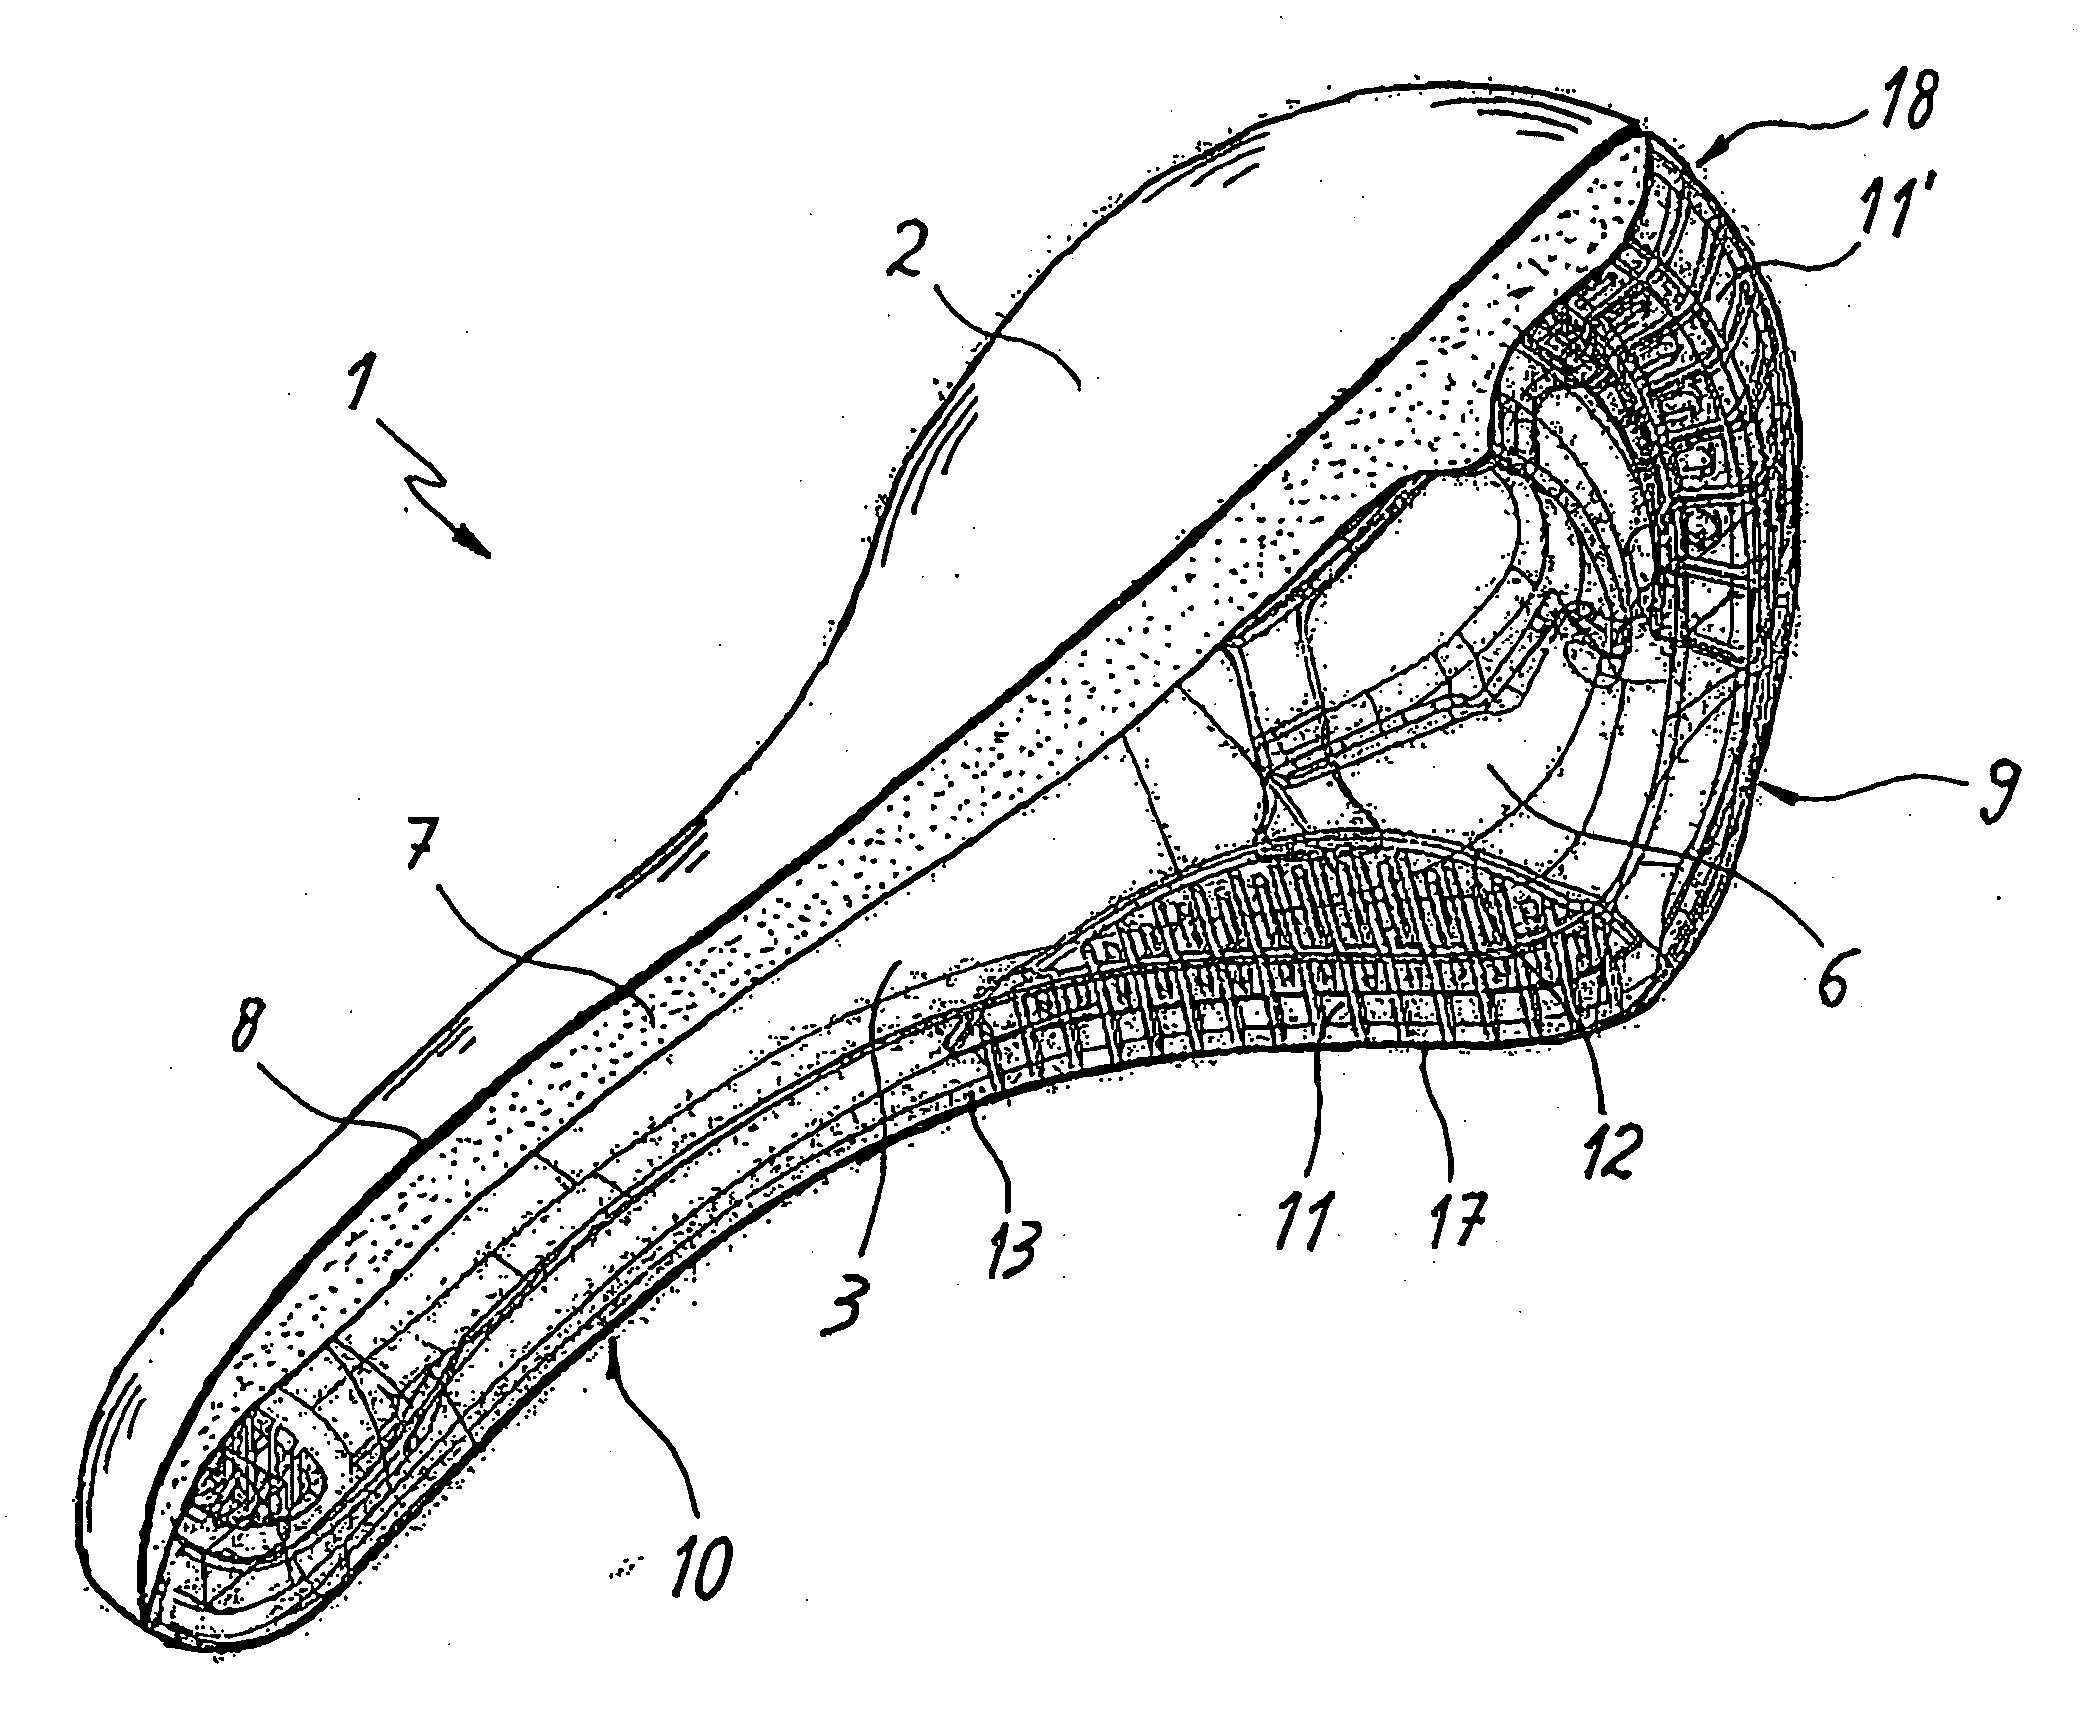 Saddle support structure